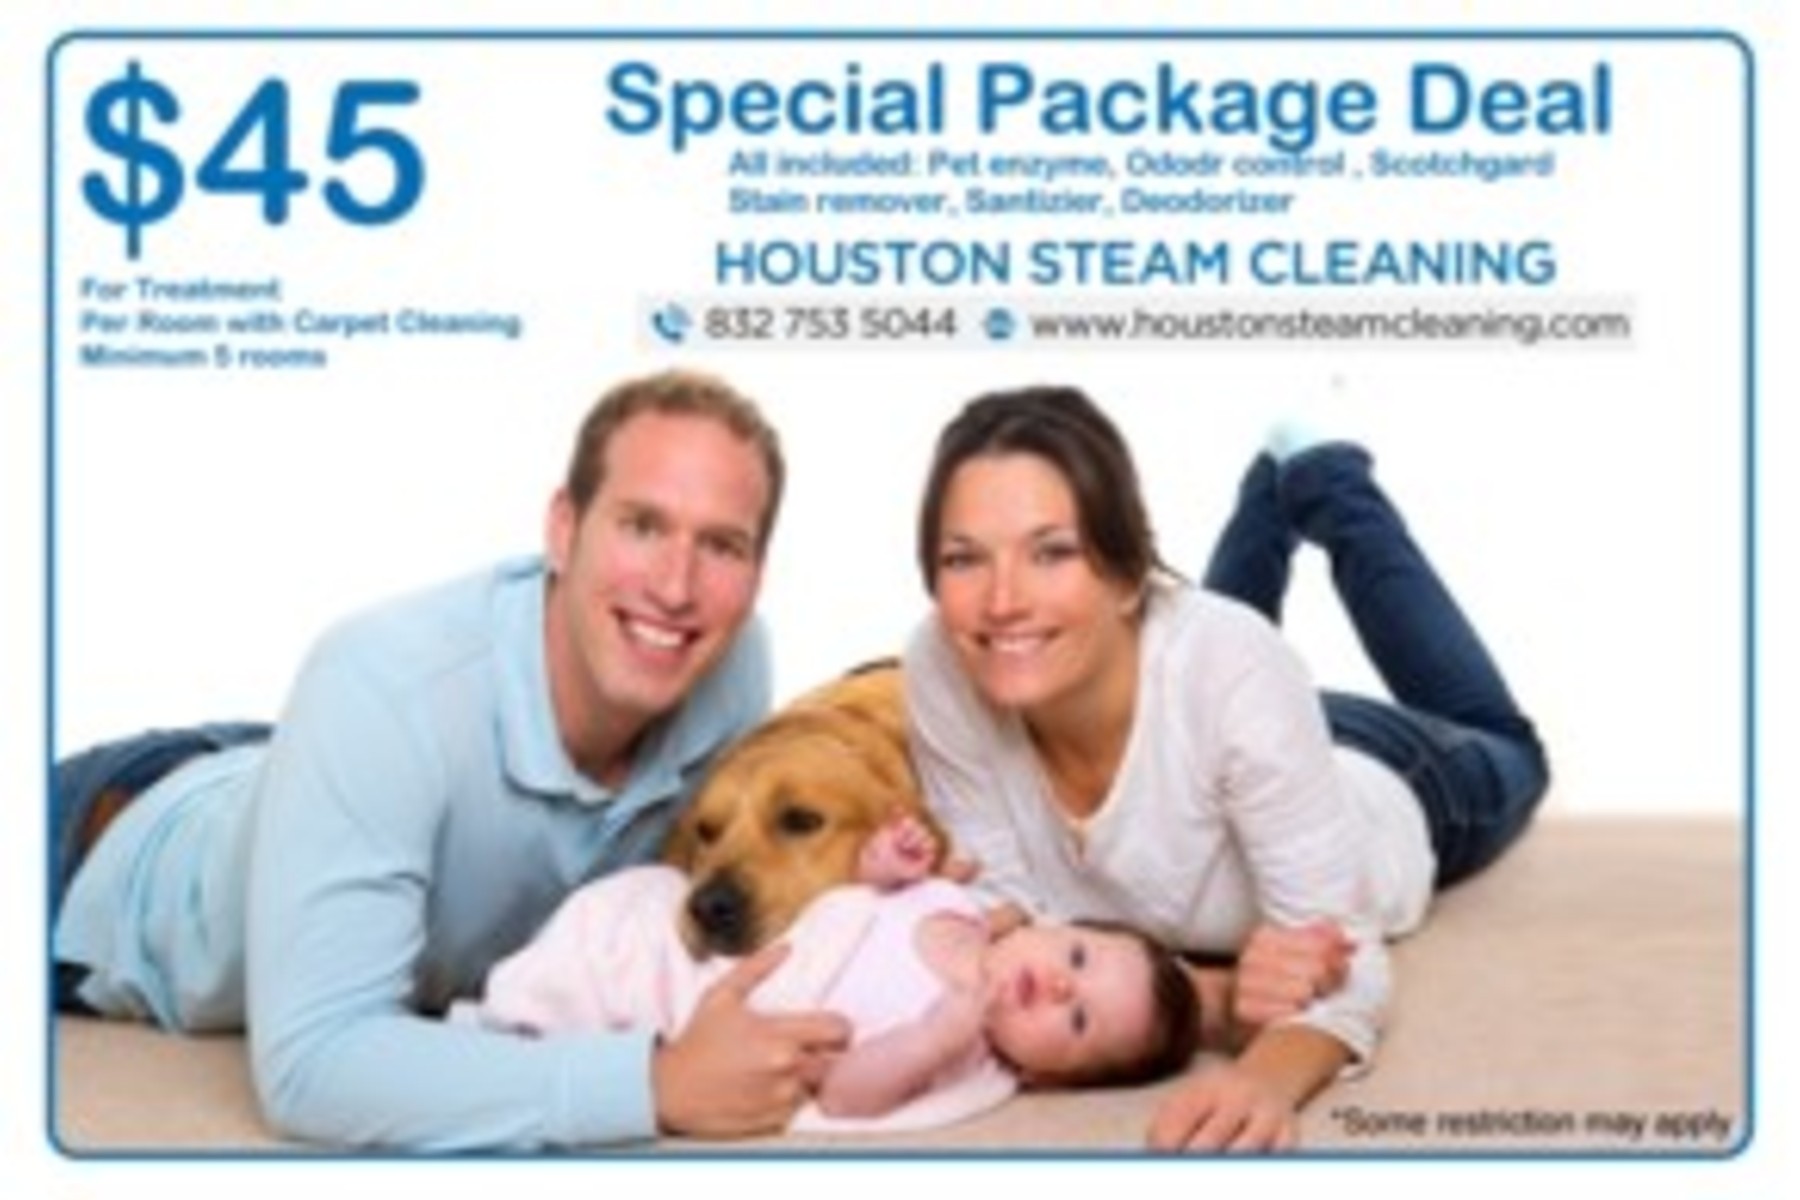 $45 for a Super Clean carpet Package deal